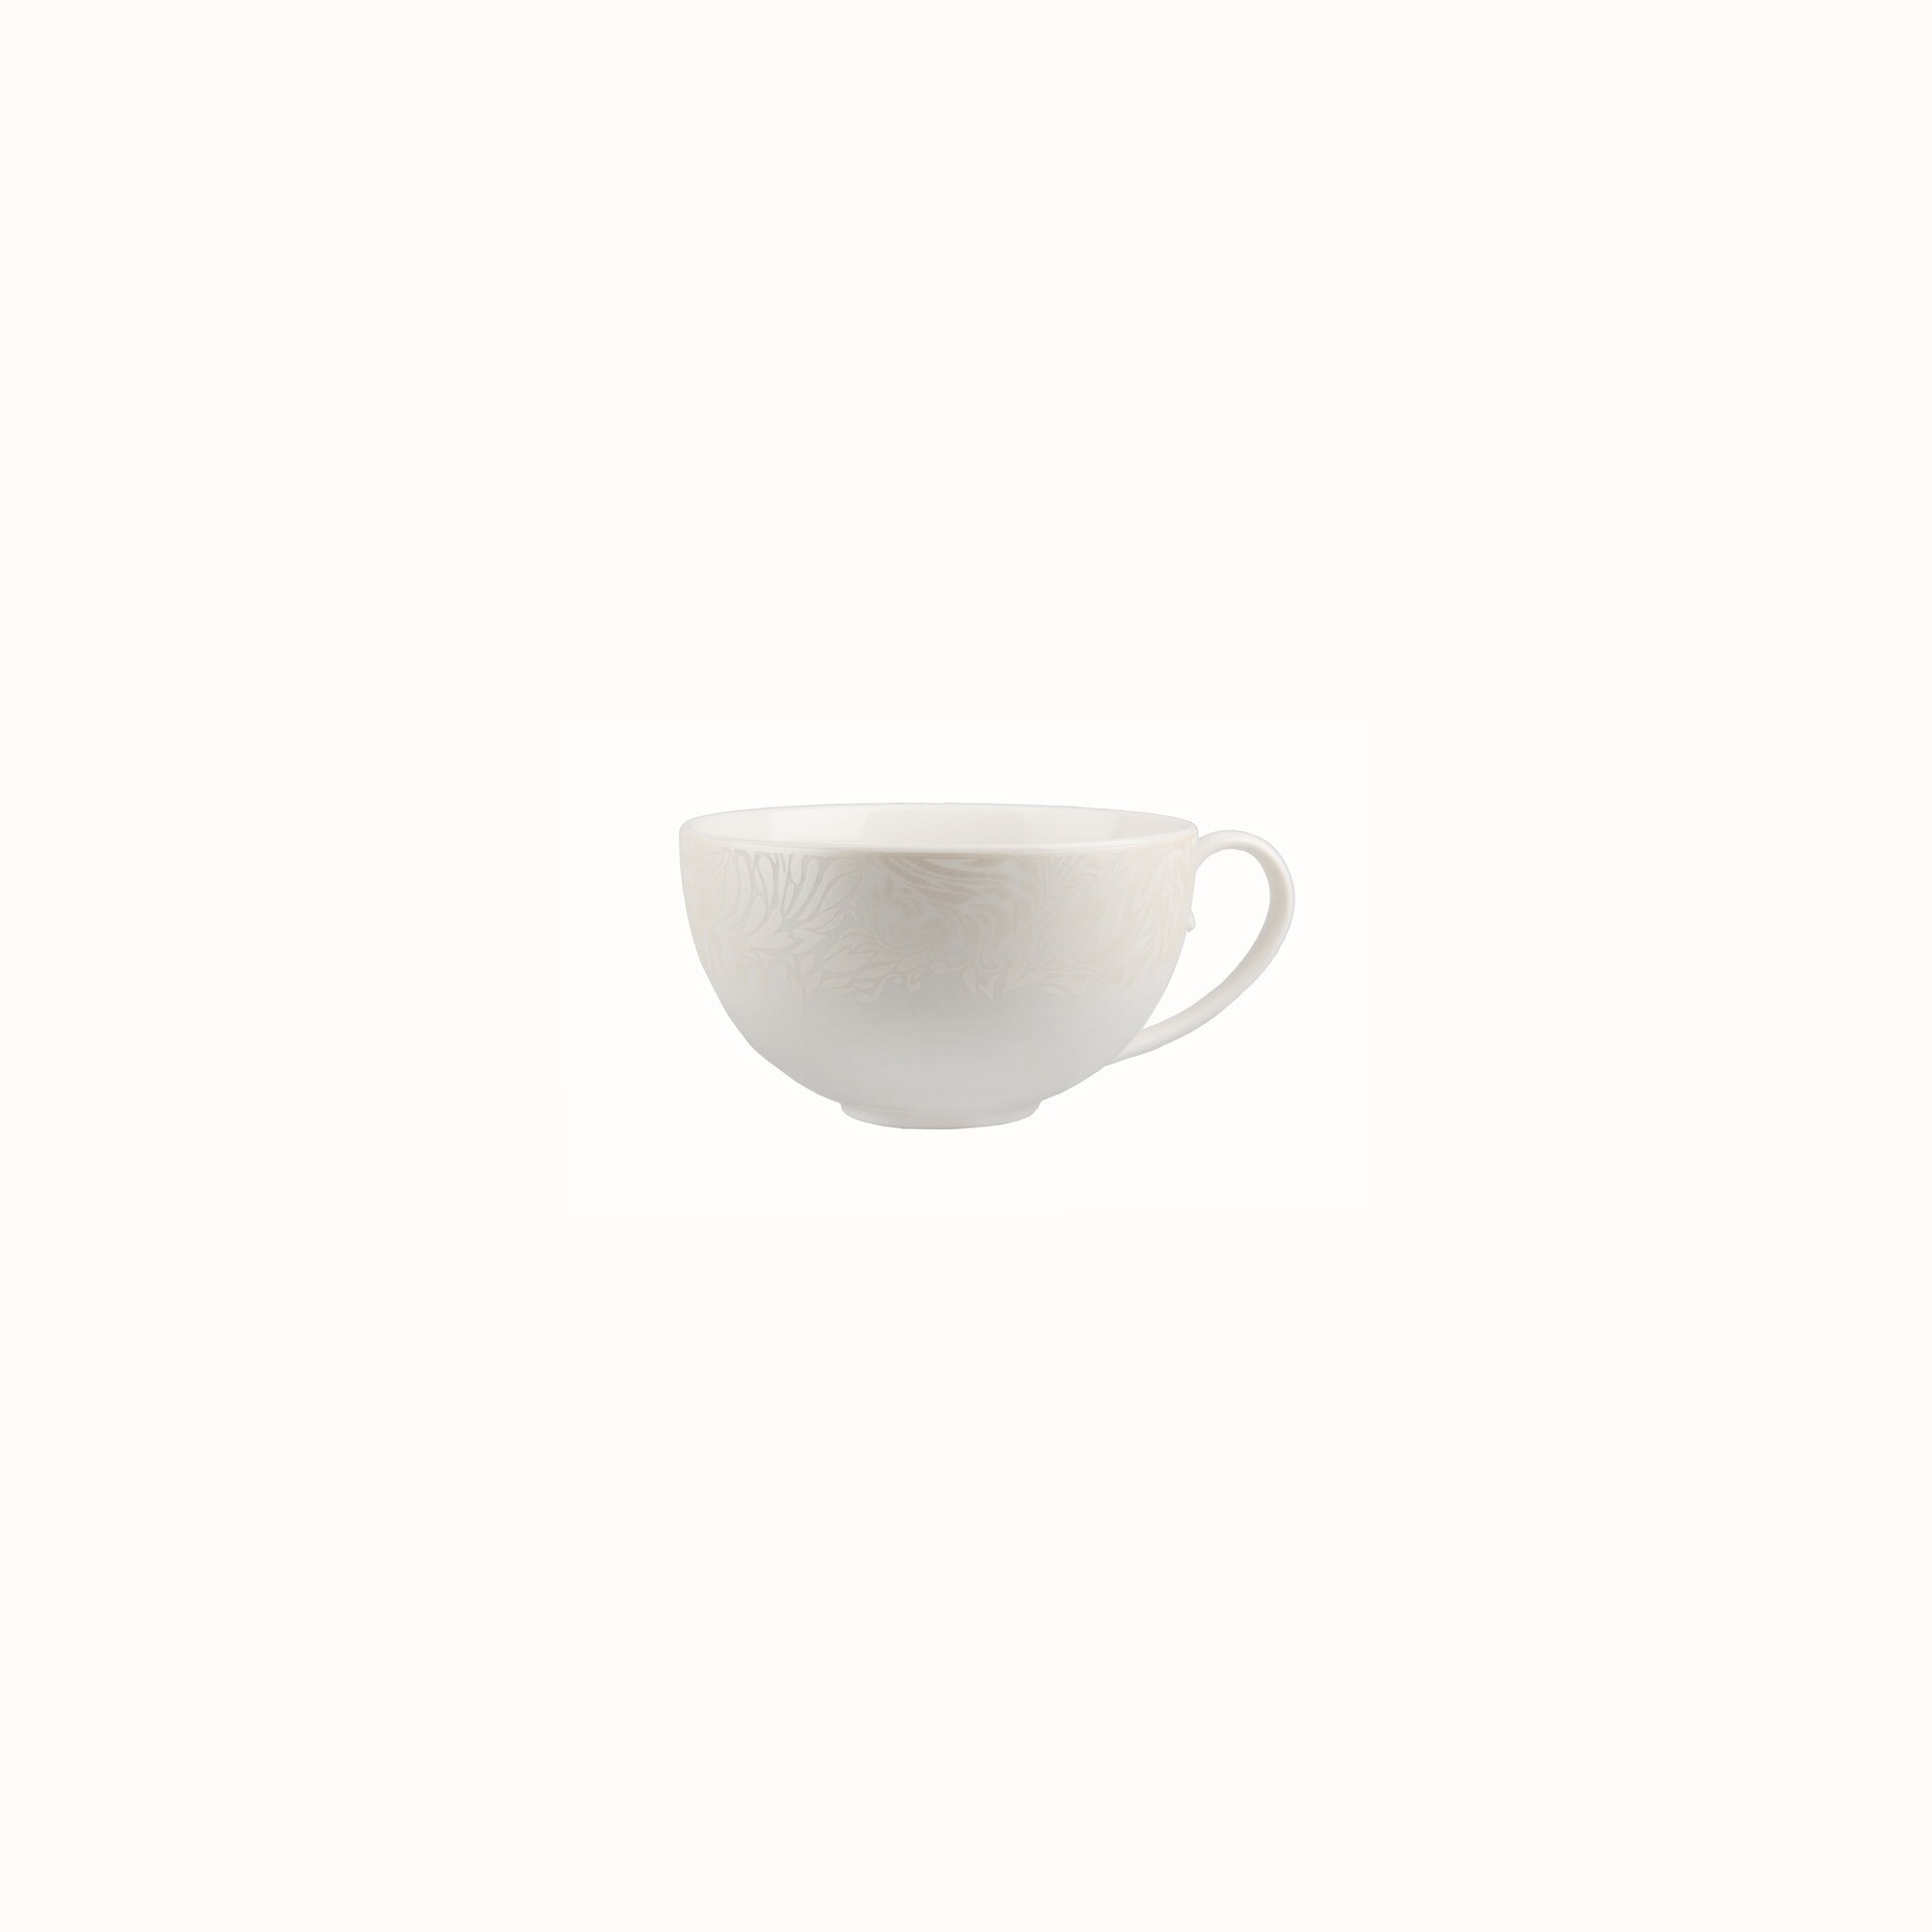 Monsoon Lucille Gold Tea/coffee Cup